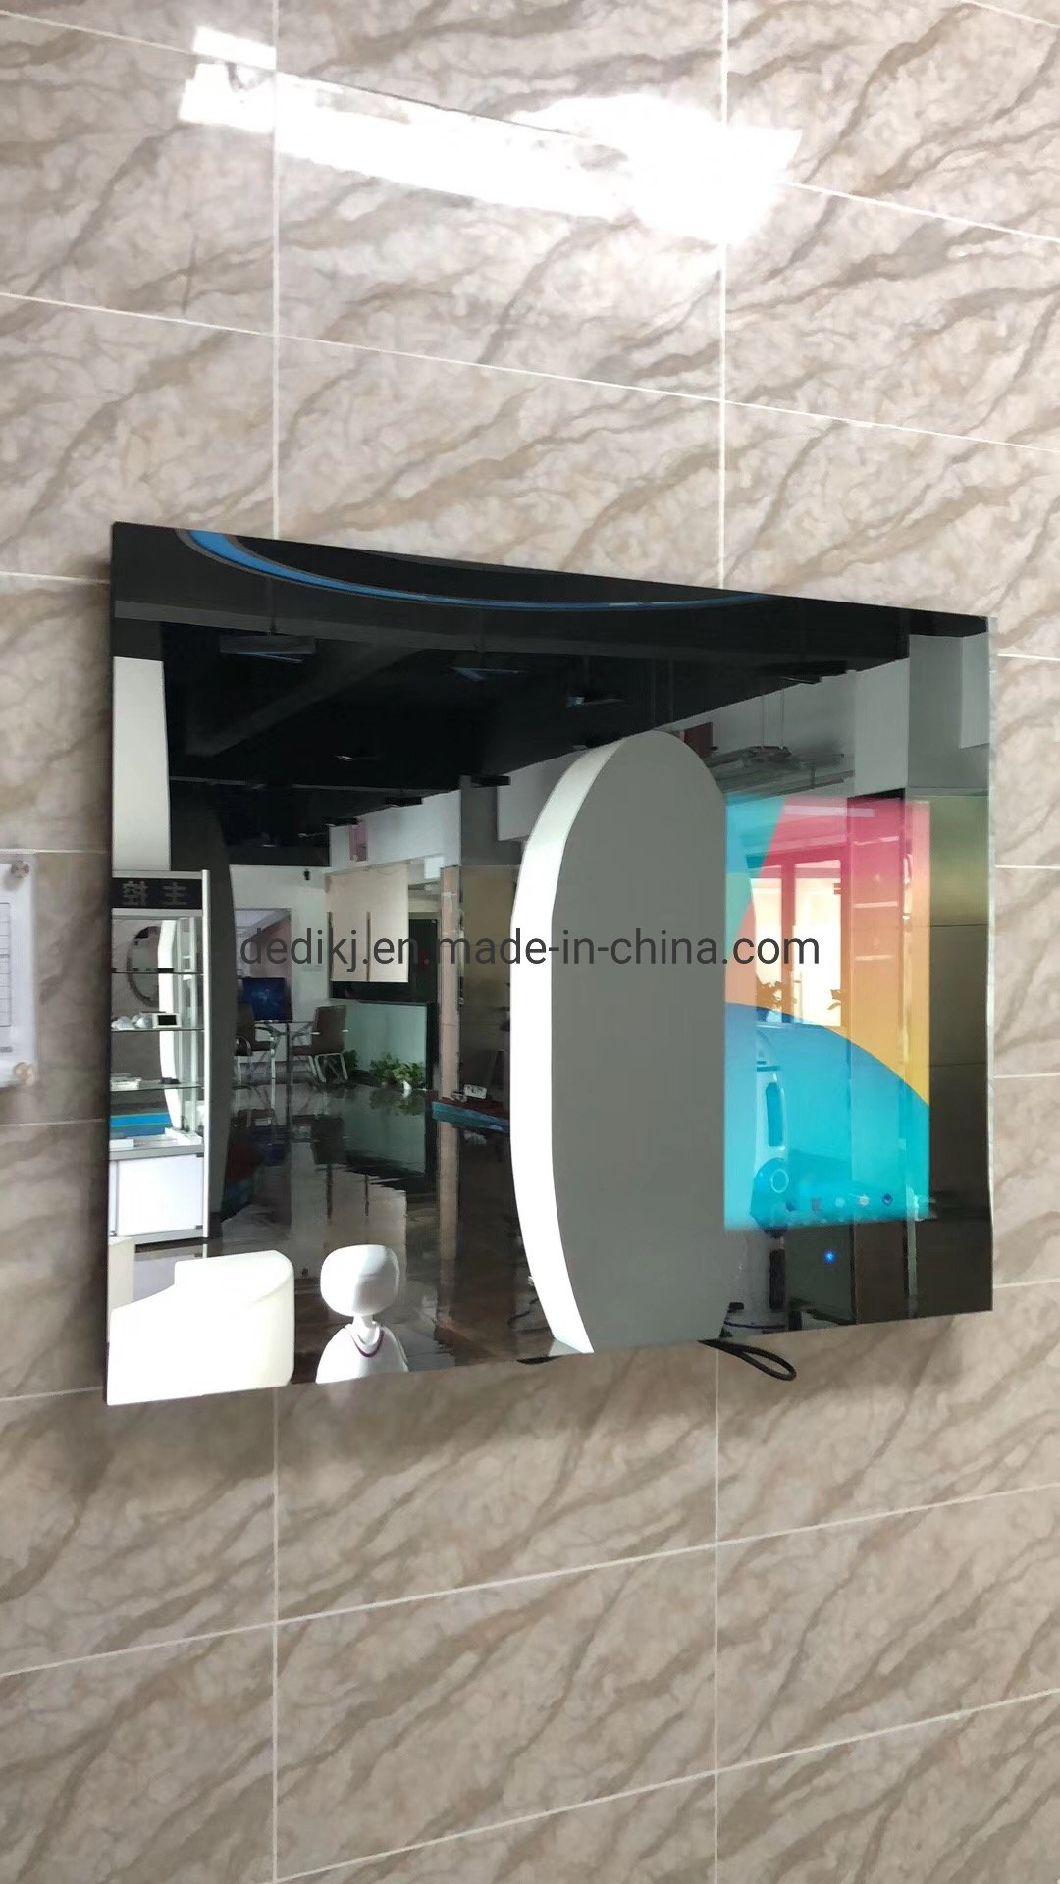 Beauty HD Android Bathroom Smart Mirror Touch Screen